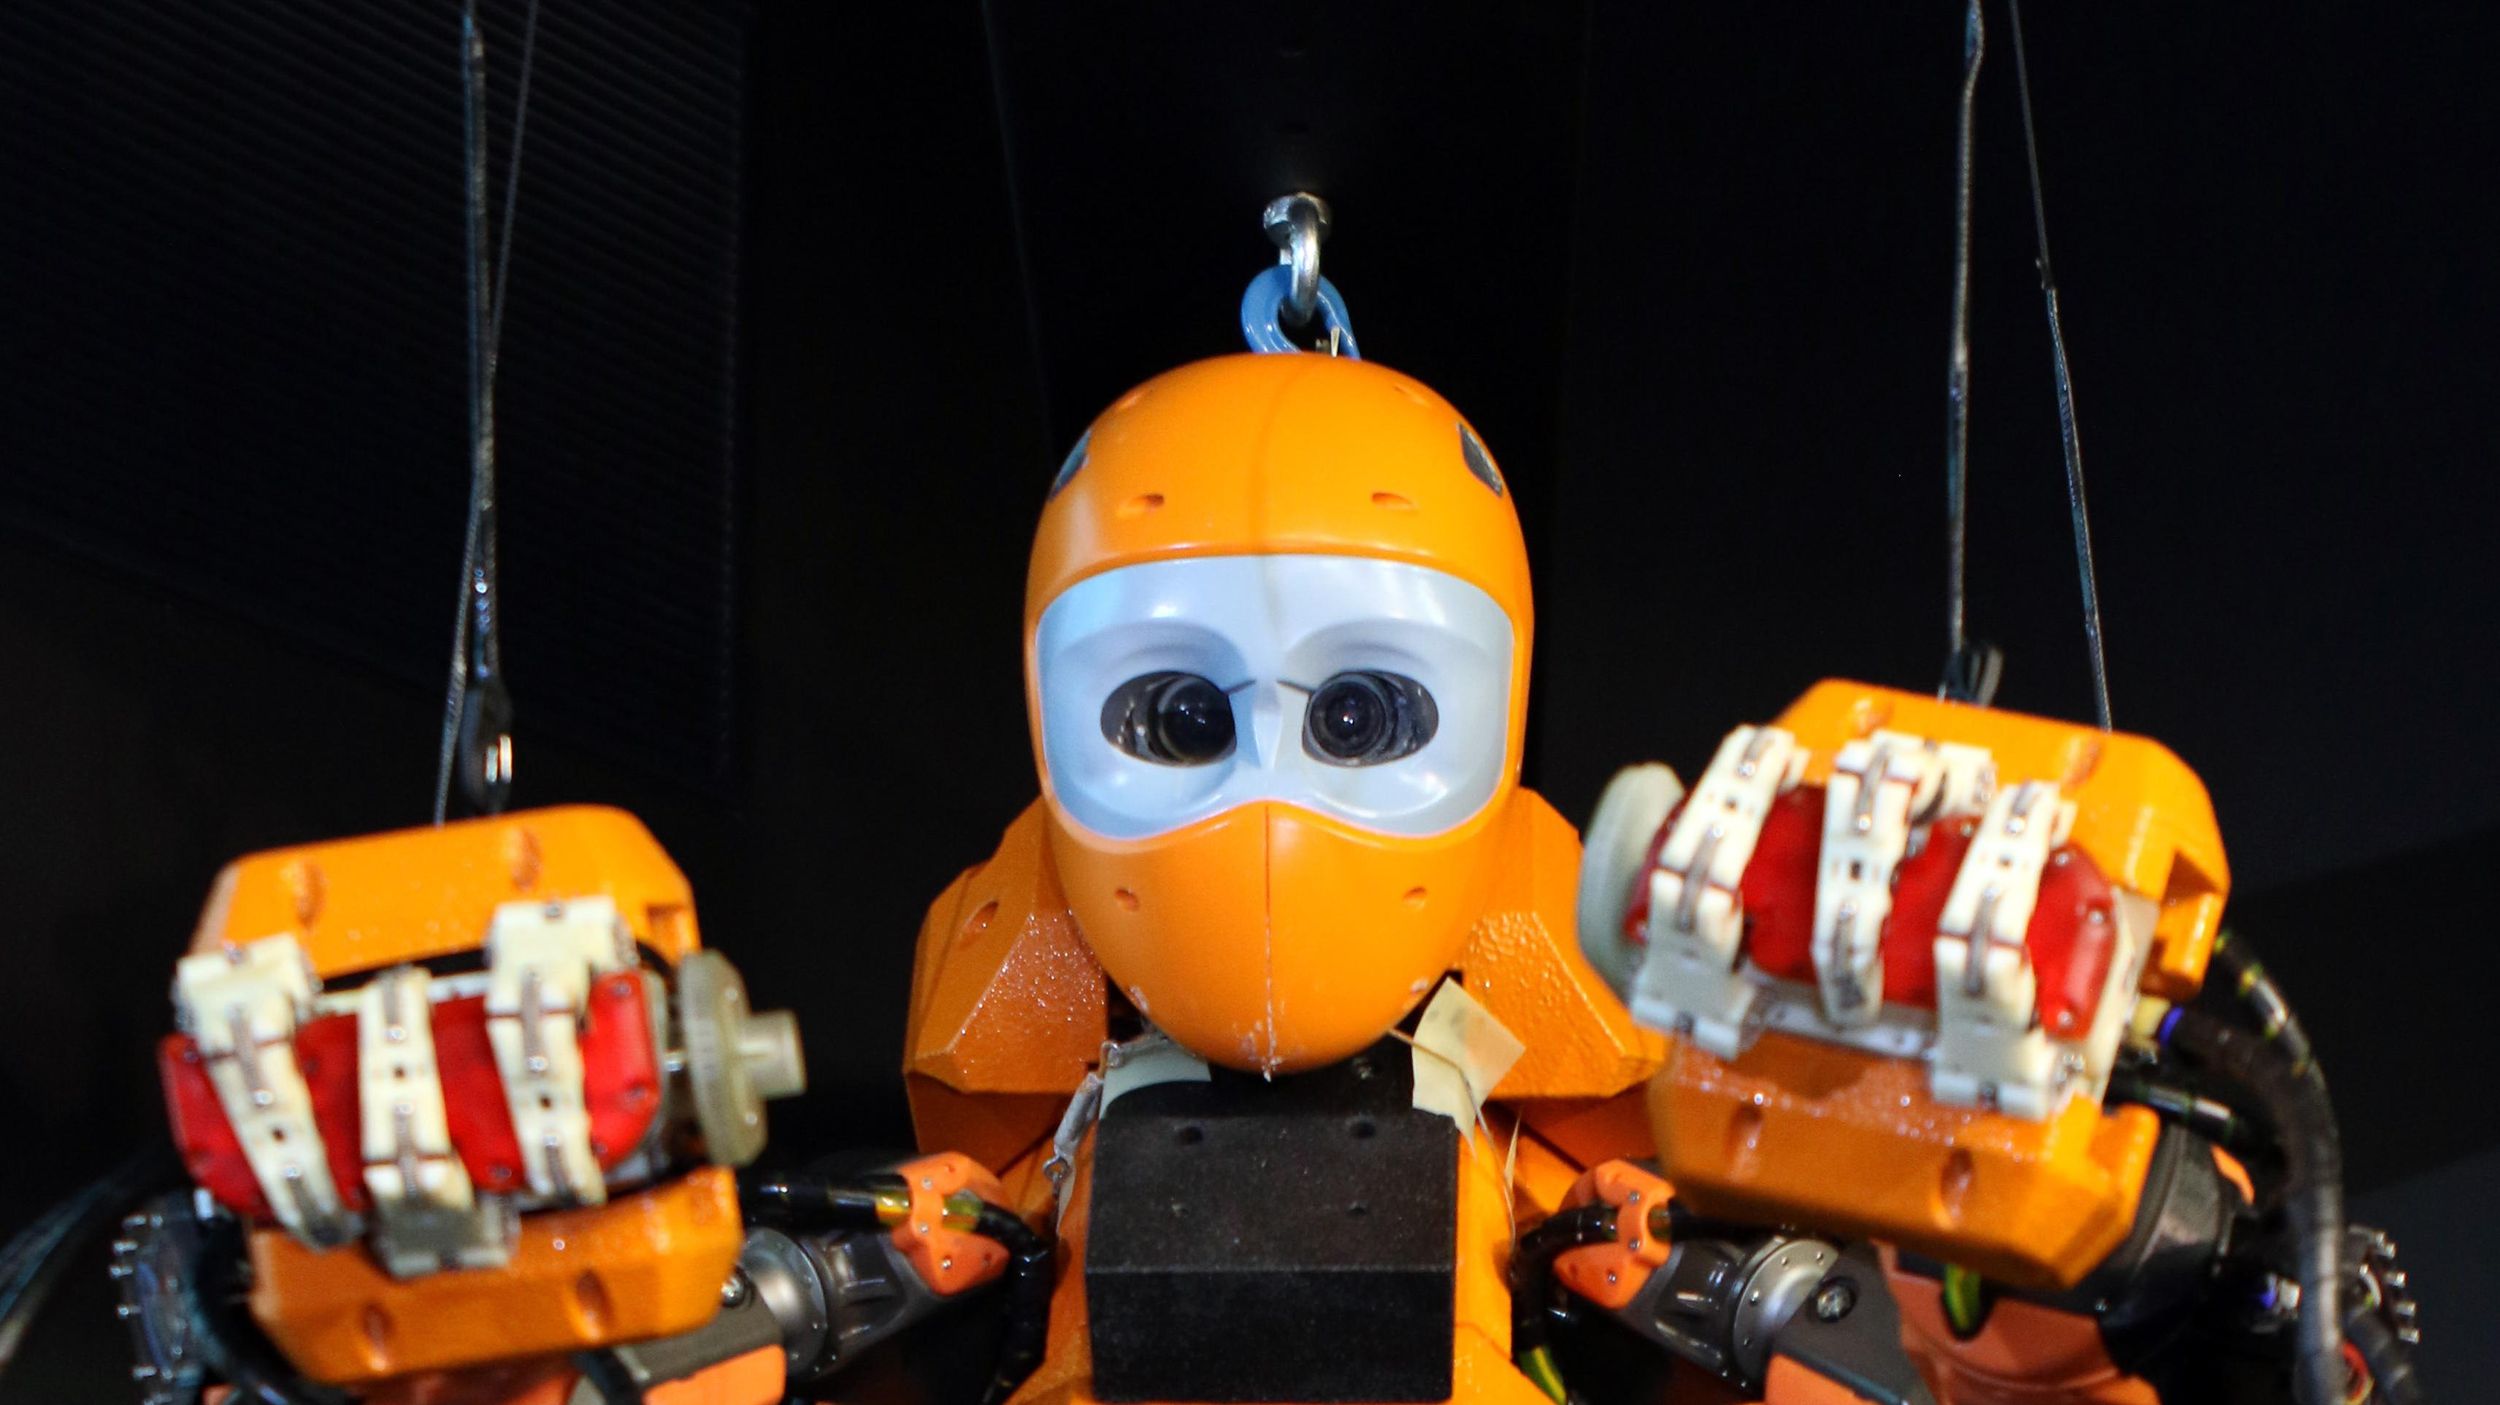 France shows humanoid underwater exploration robot | The Spokesman-Review